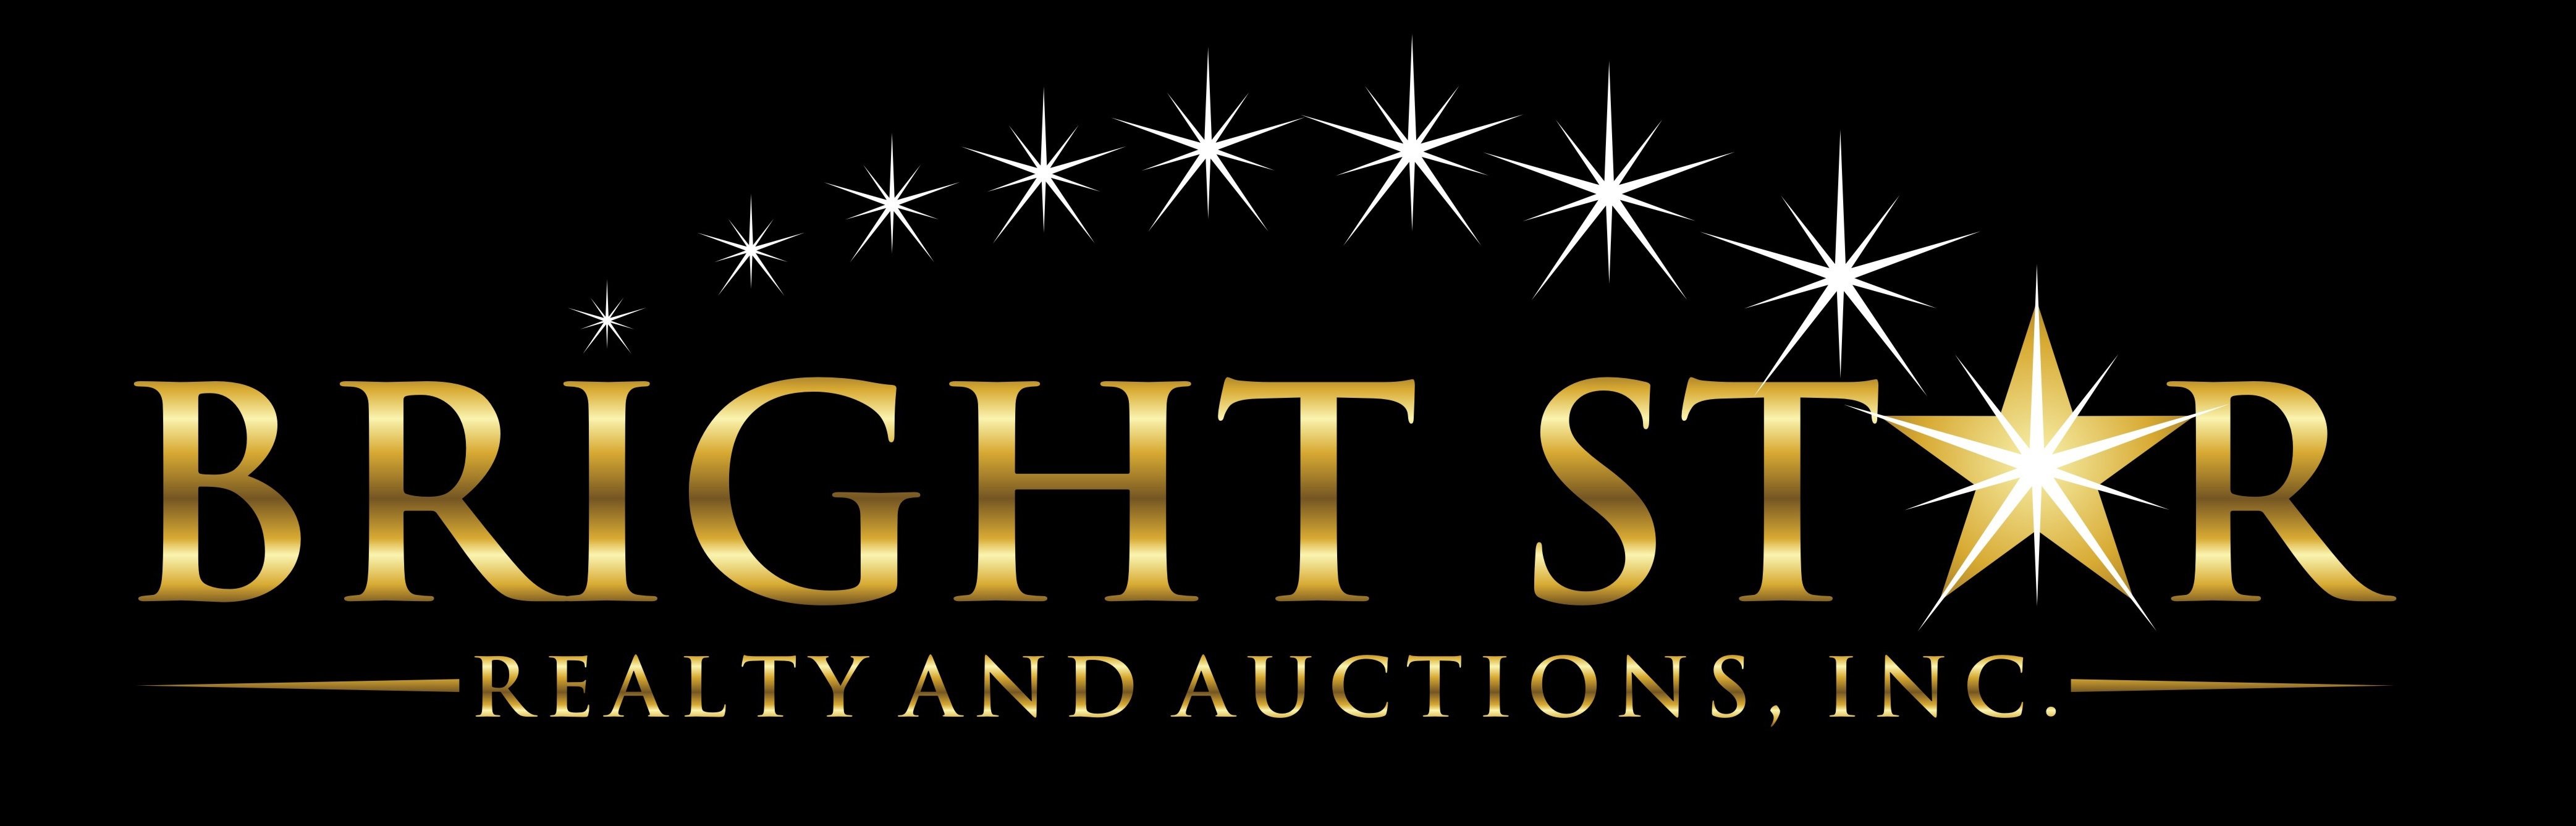 Bright Star Realty and Auctions